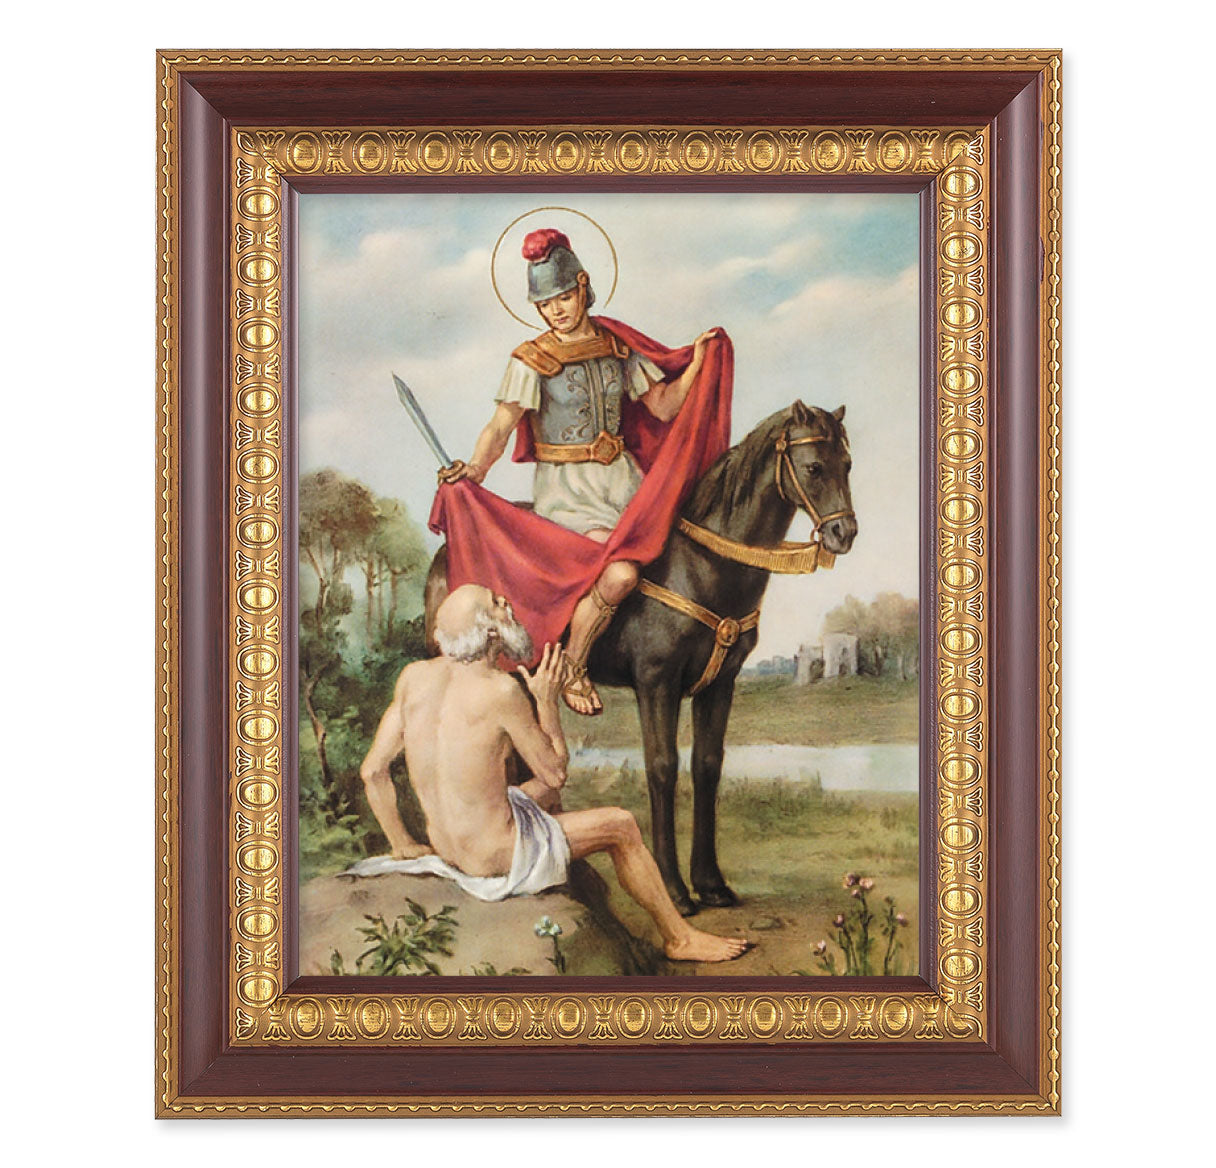 St. Martin of Tours Picture Framed Wall Art Decor Large, Dark Cherry with Gold Egg and Dart Detailed Frame